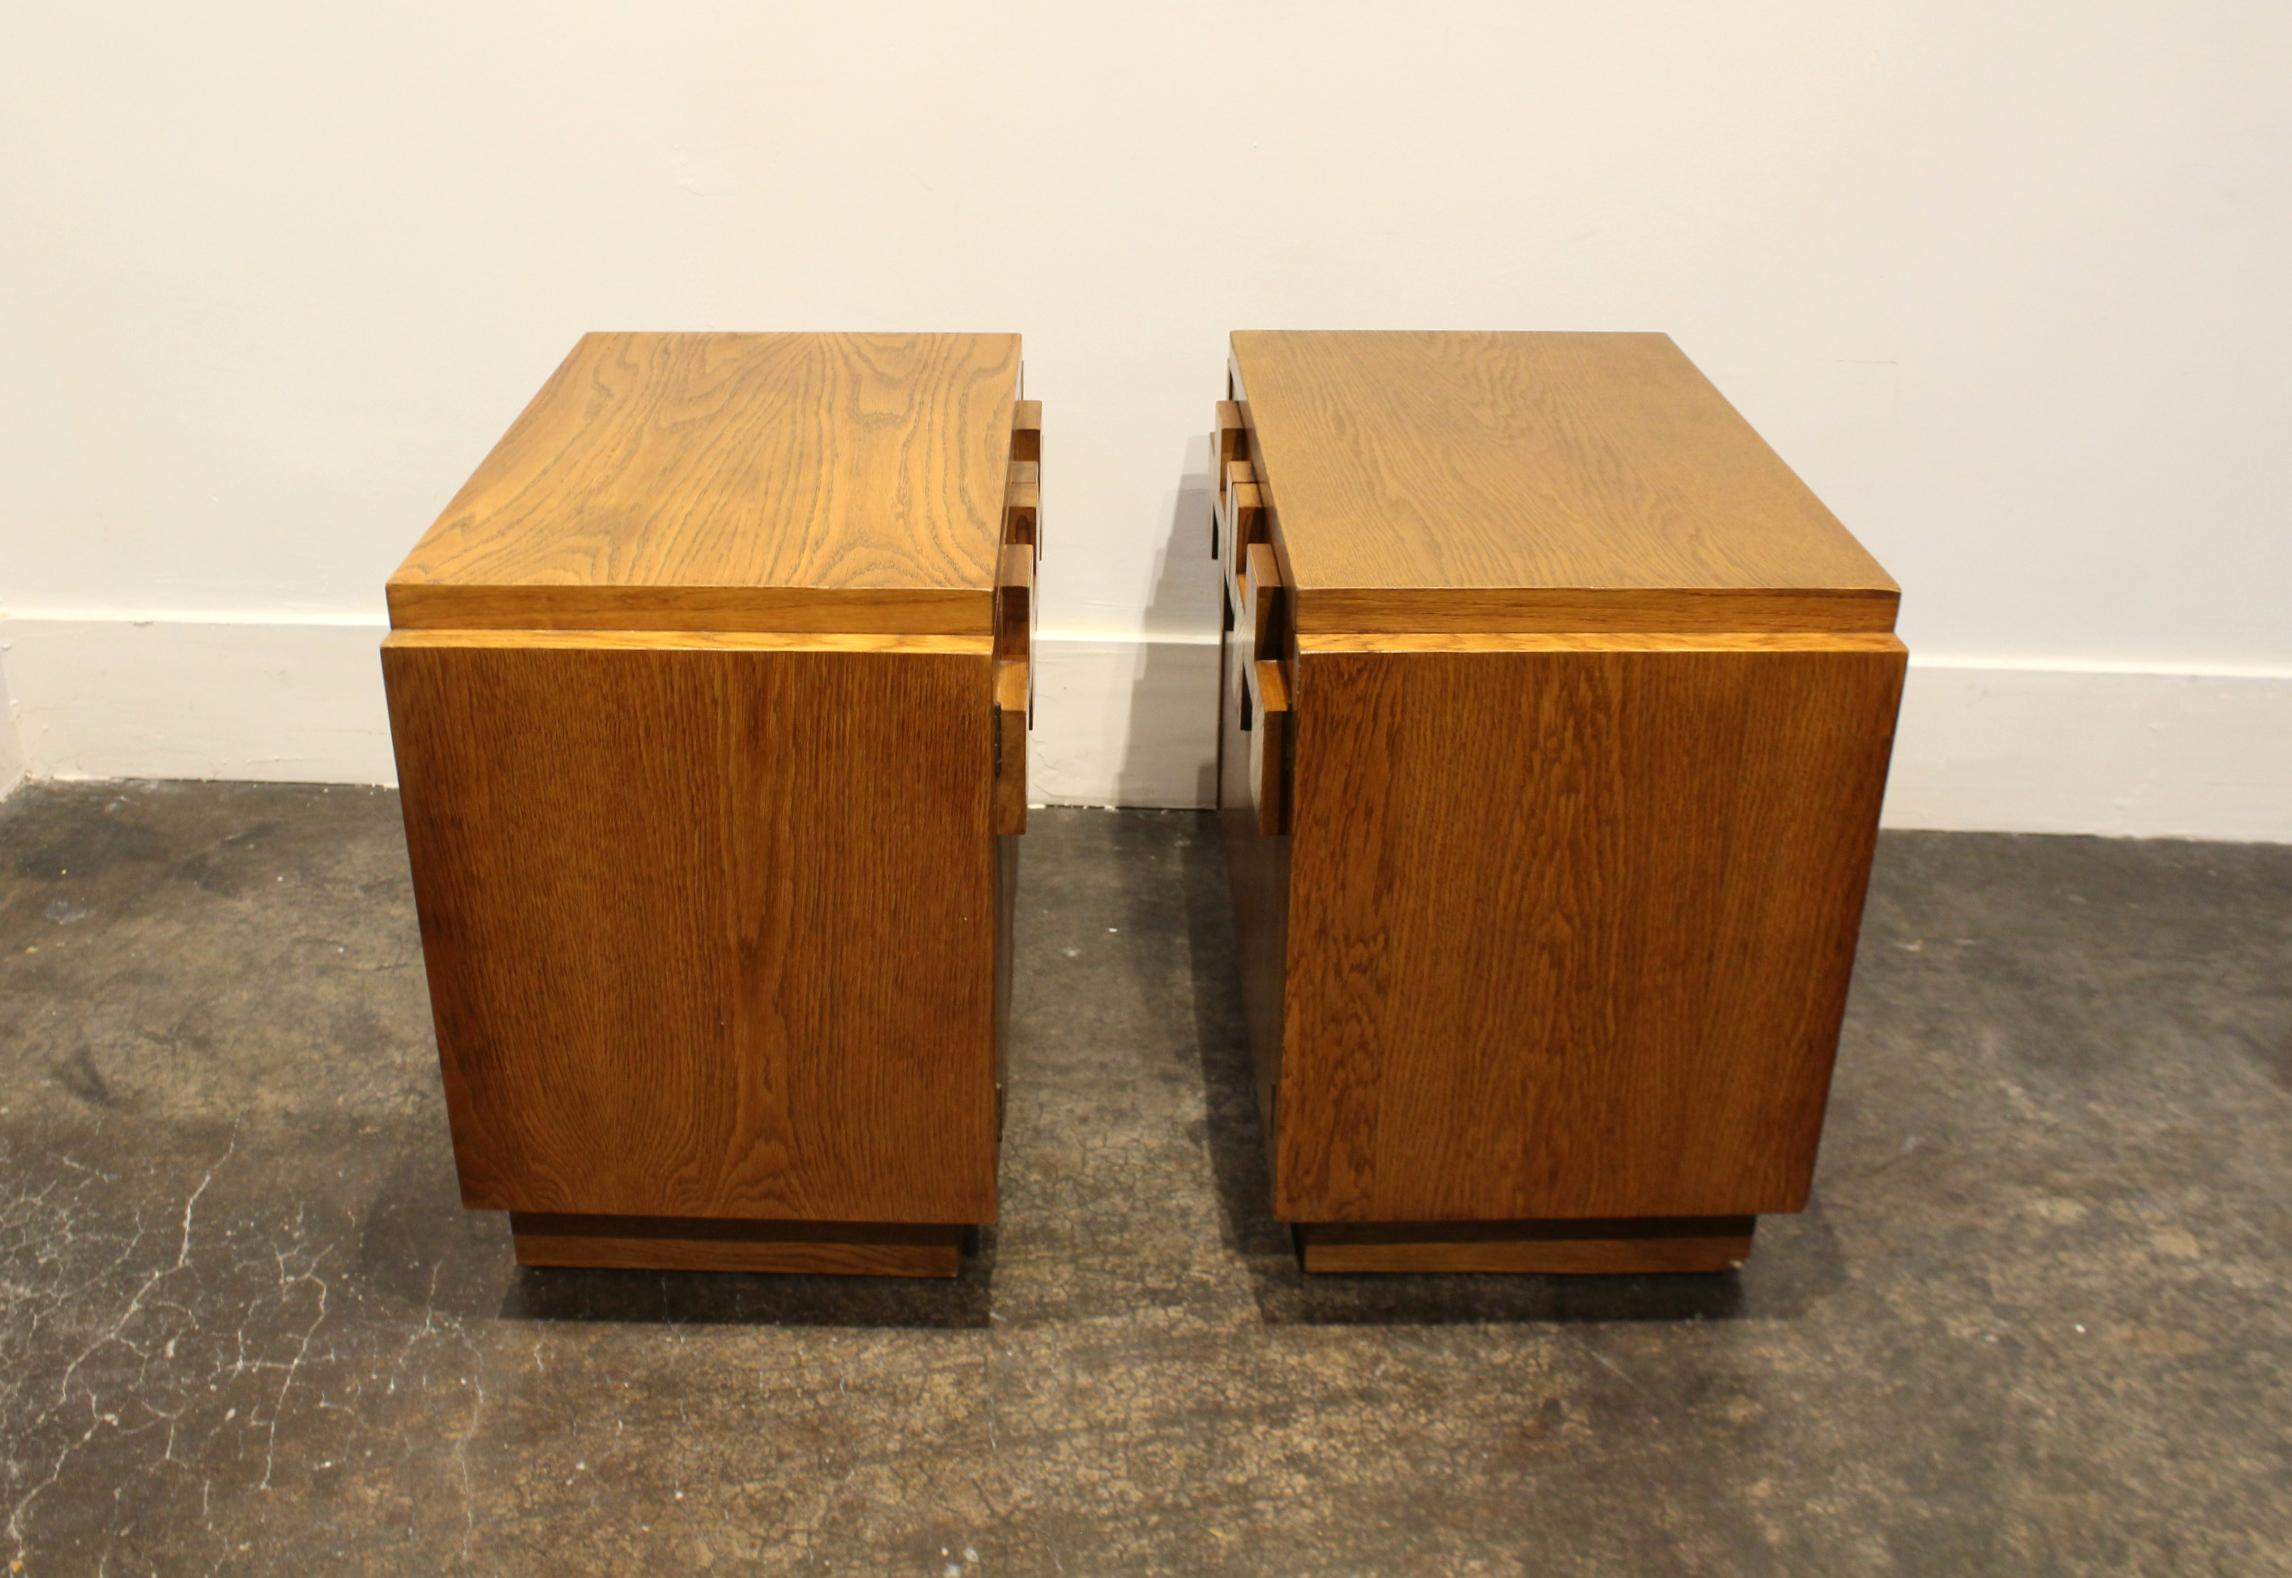 20th Century Pair of Oak 1970s Mid-Century Modern Brutalist Nightstands by Lane For Sale